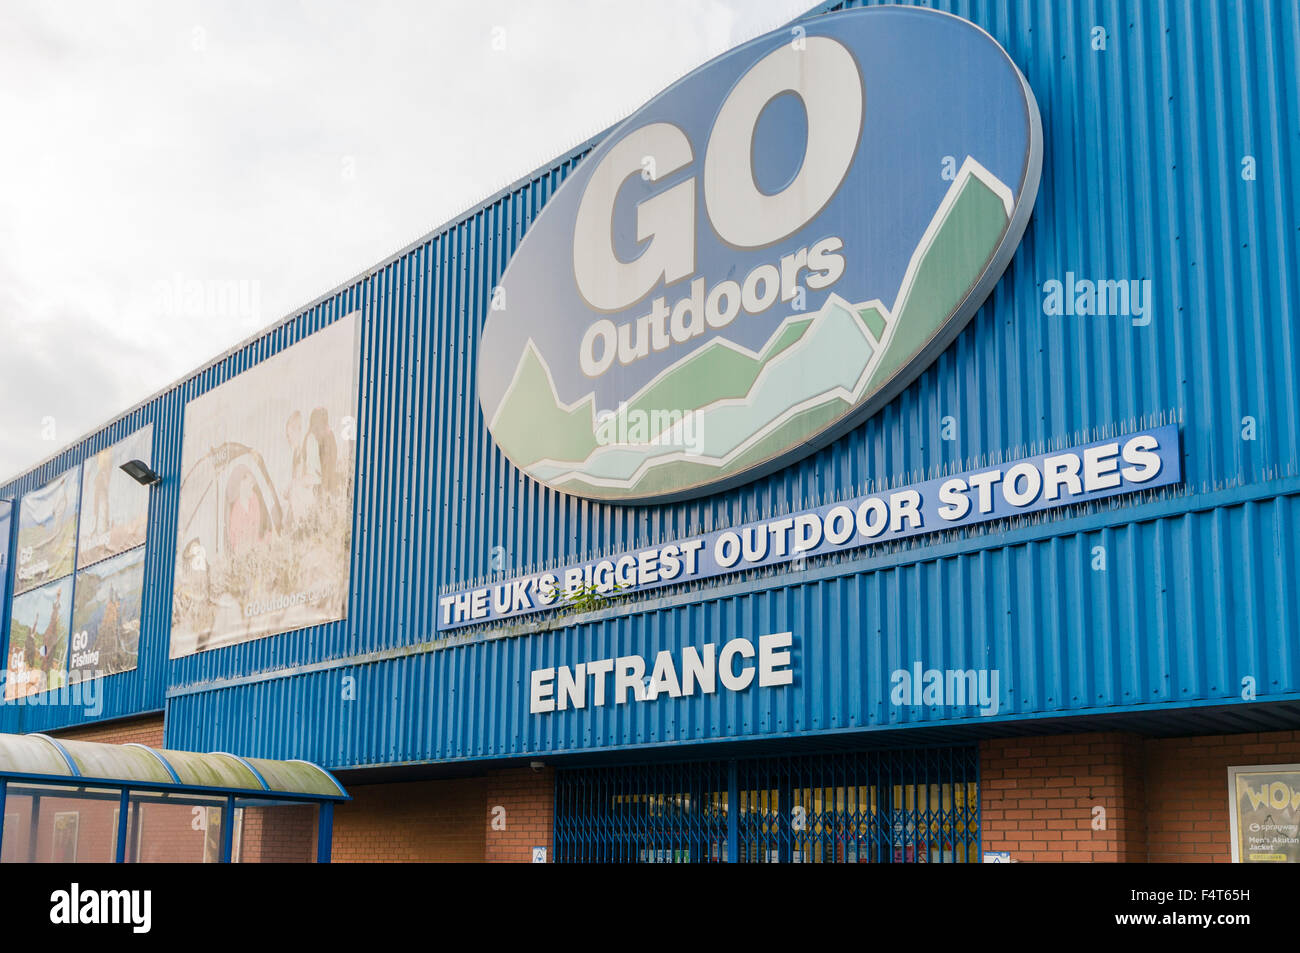 Go Outdoors shop, selling hiking and camping equipment. Stock Photo